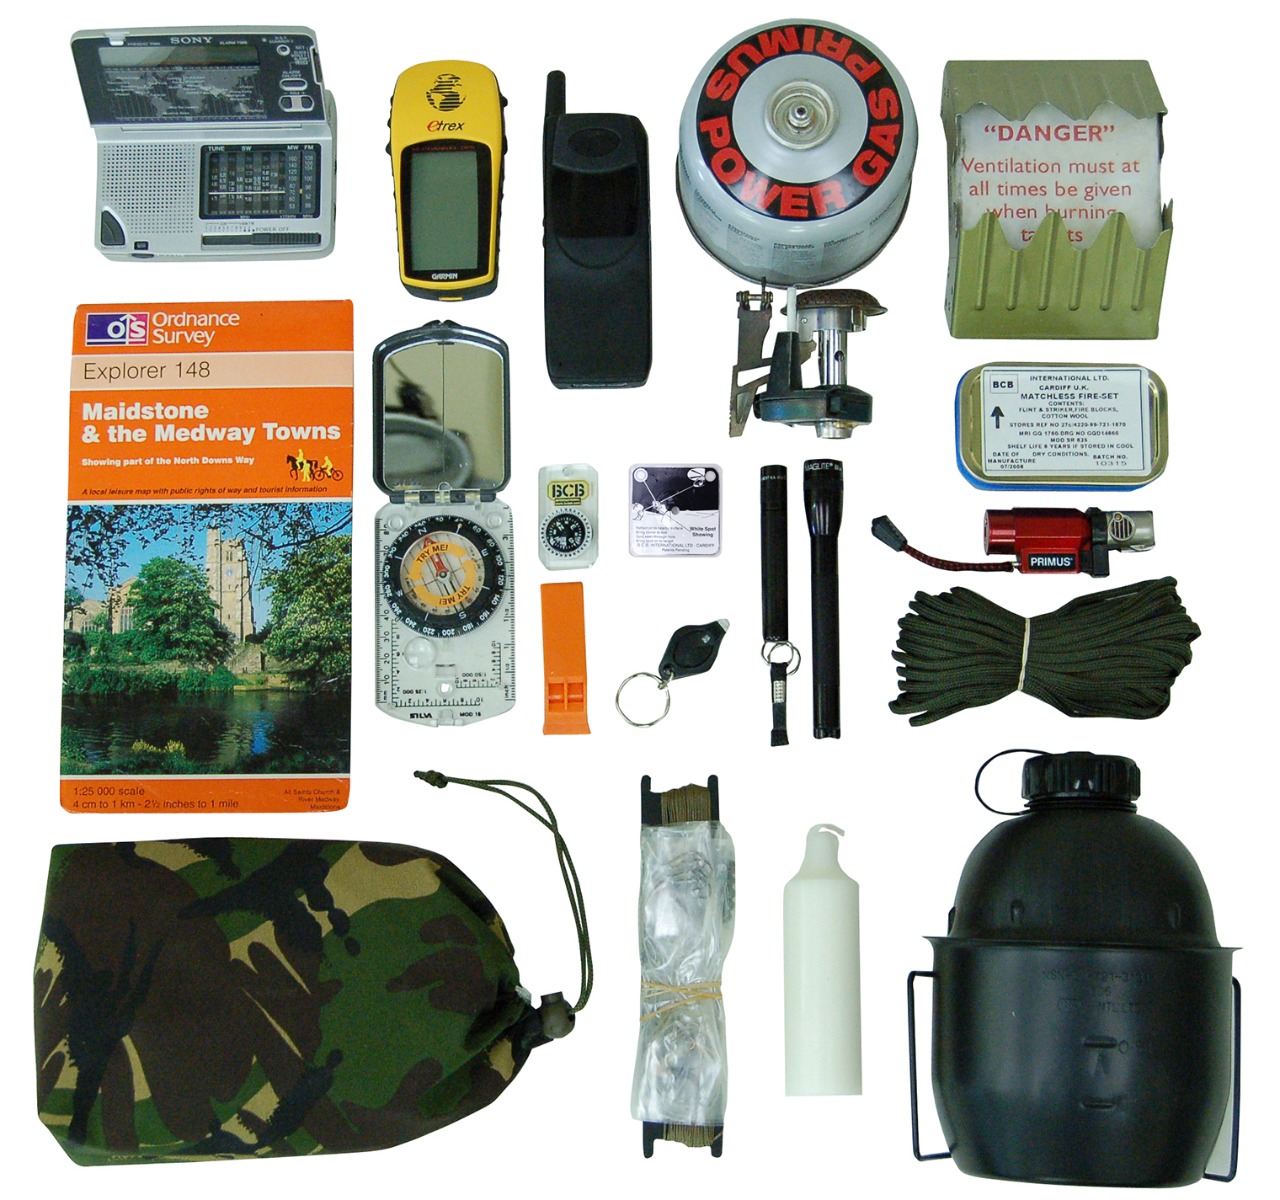 DOWNLOAD NOW, Essential Survival Items Kit Layout